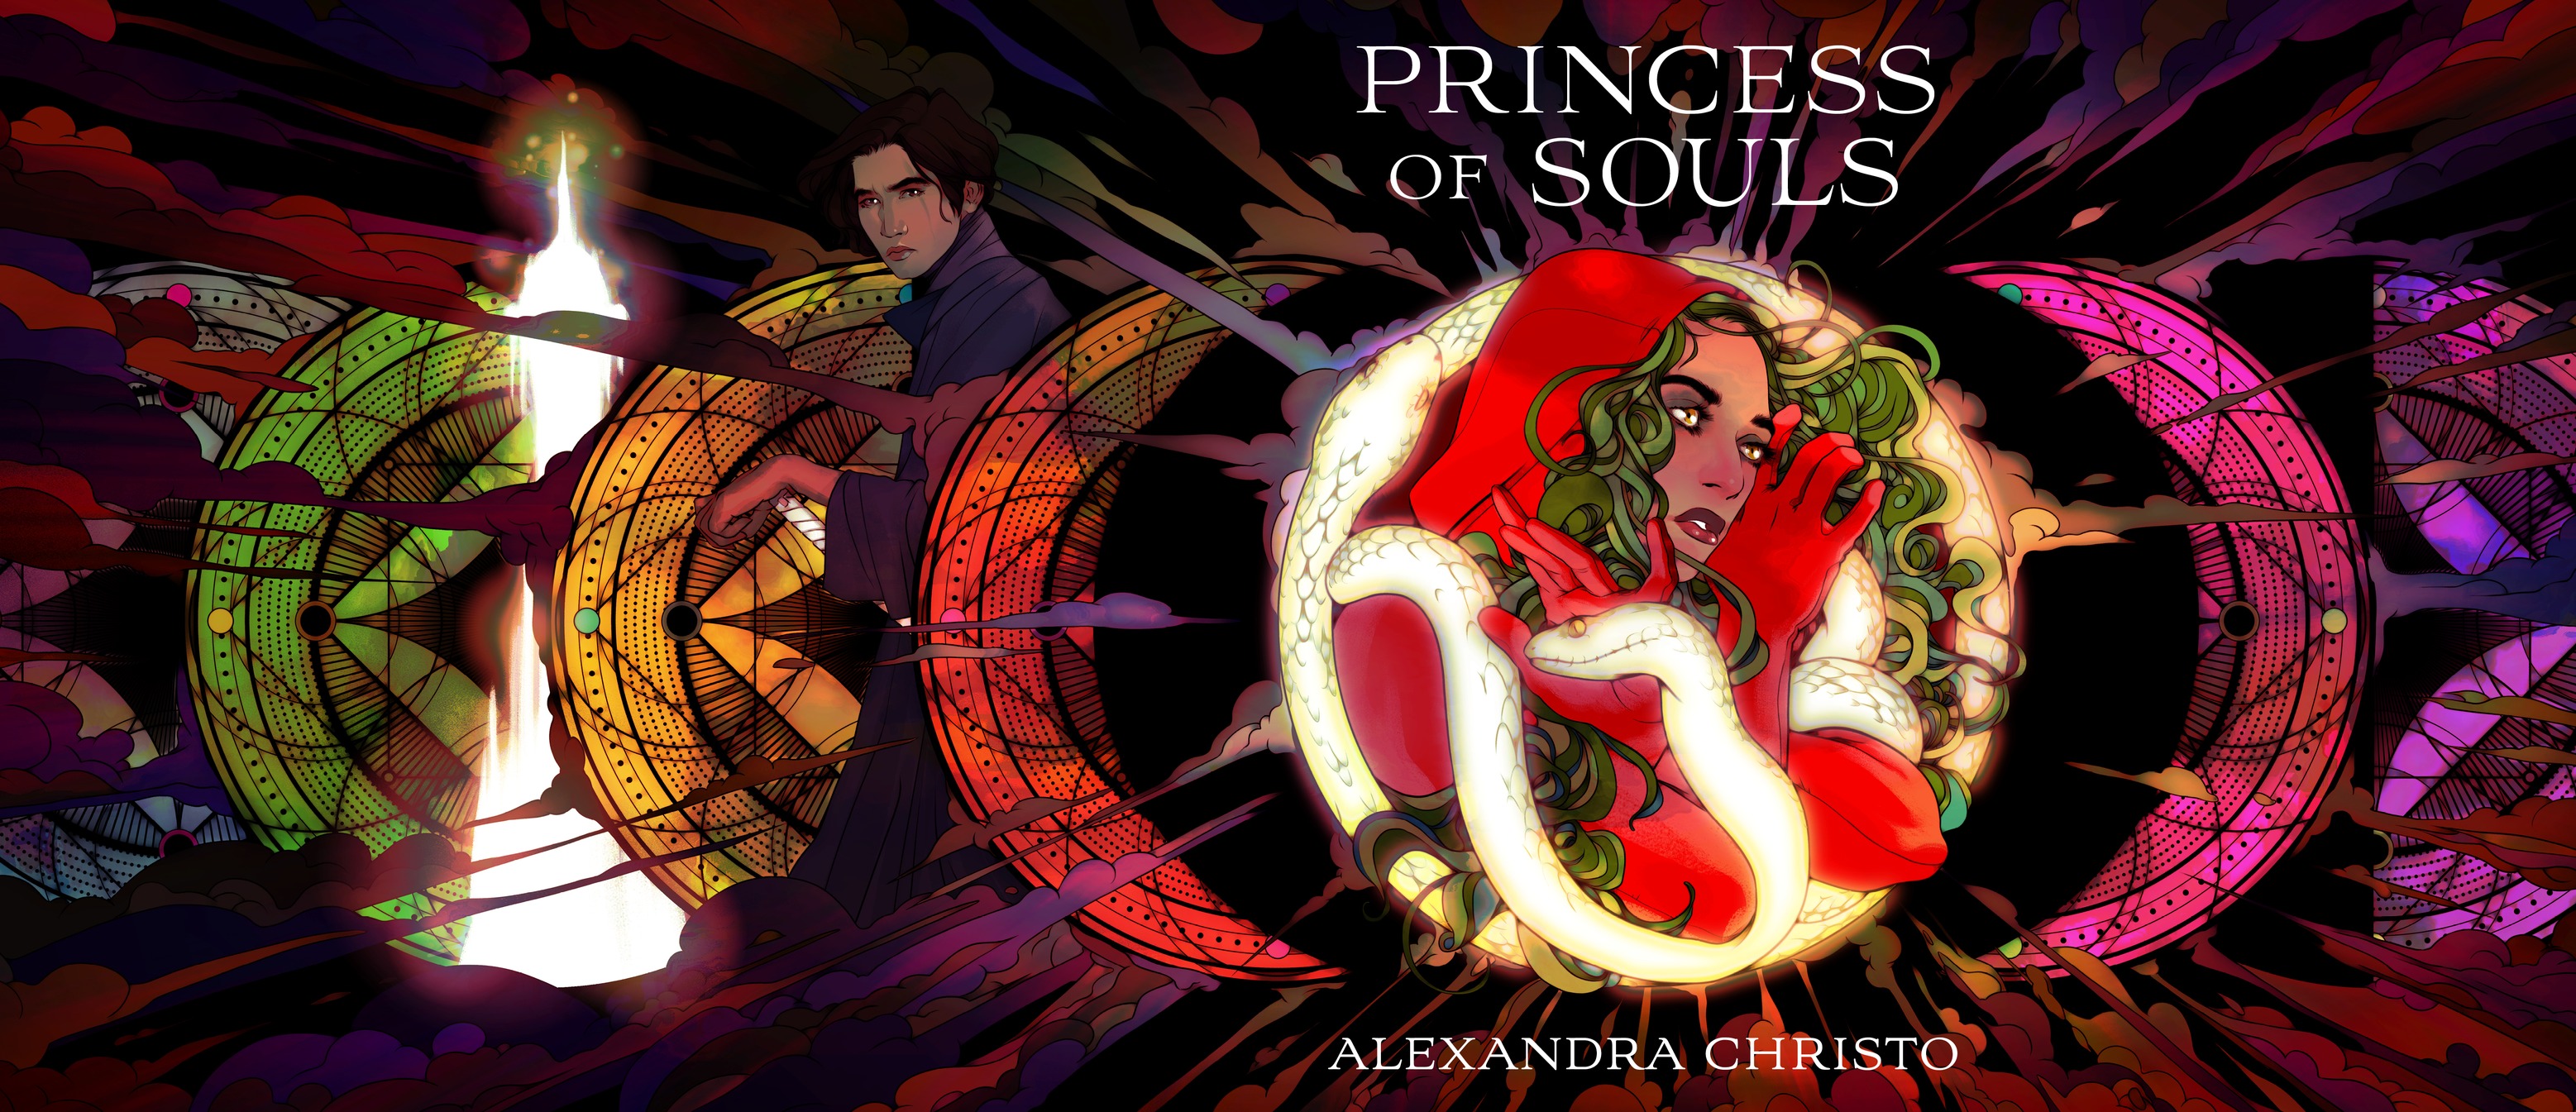 An Interview with Alexandra Christo, Author of Princess of Souls